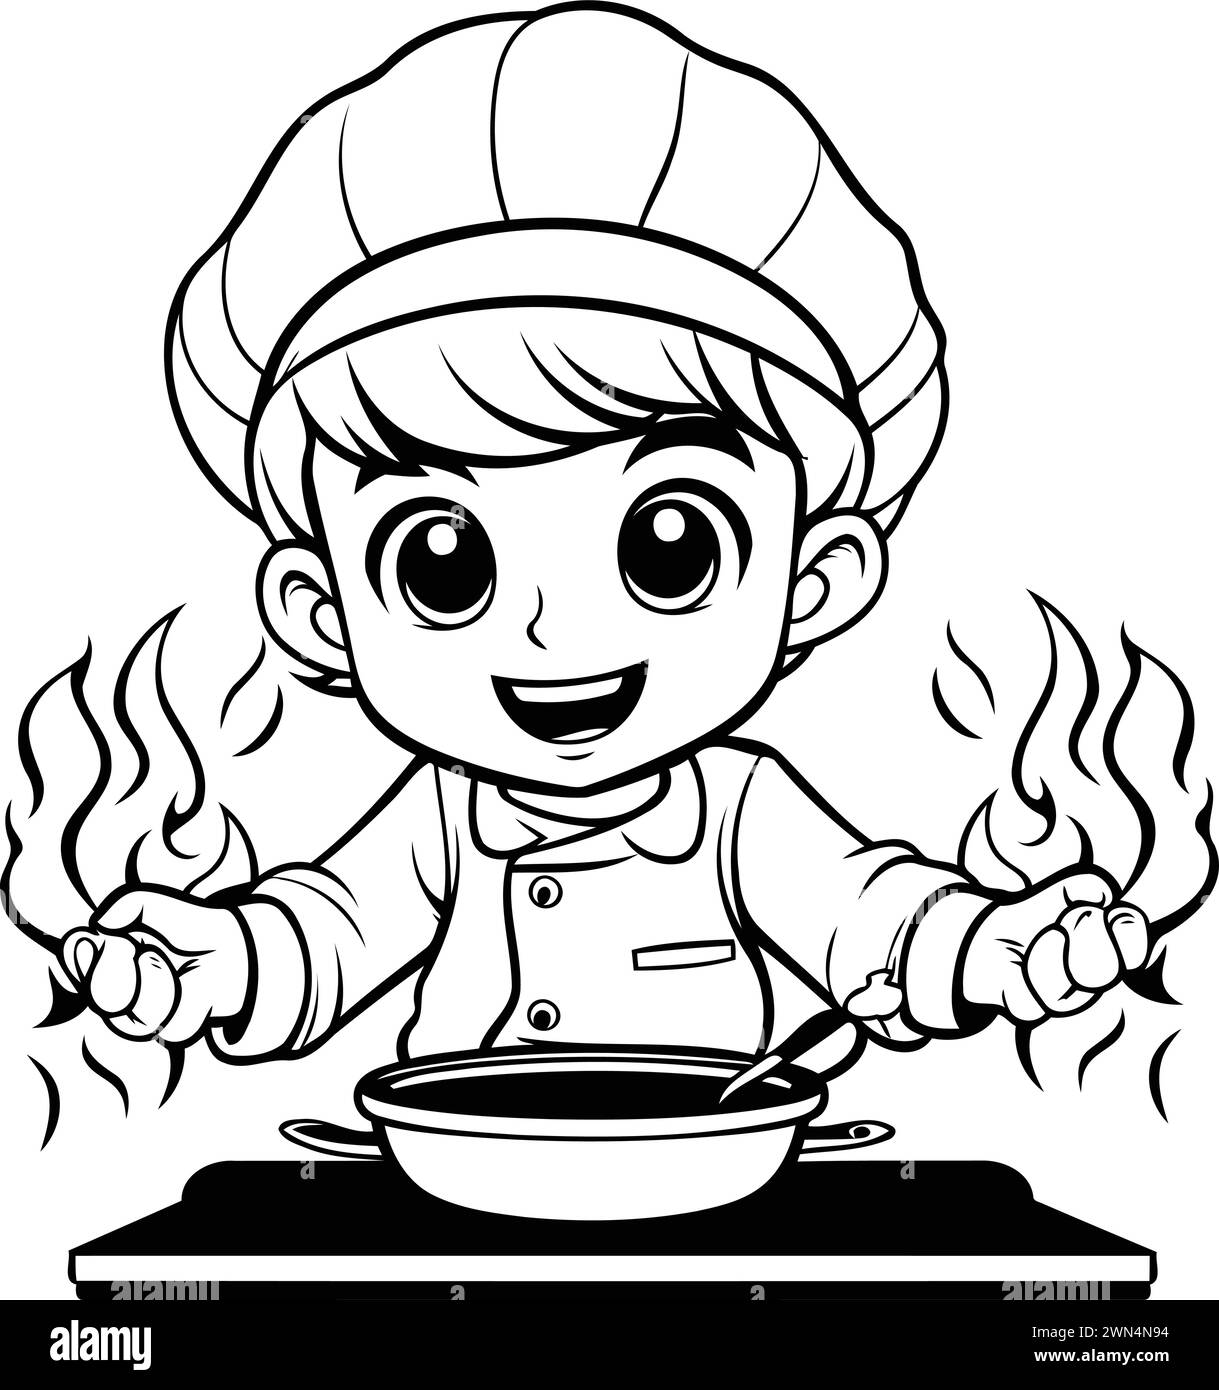 Black and White Cartoon Illustration of Cute Little Chef Girl Cooking Food for Coloring Book Stock Vector